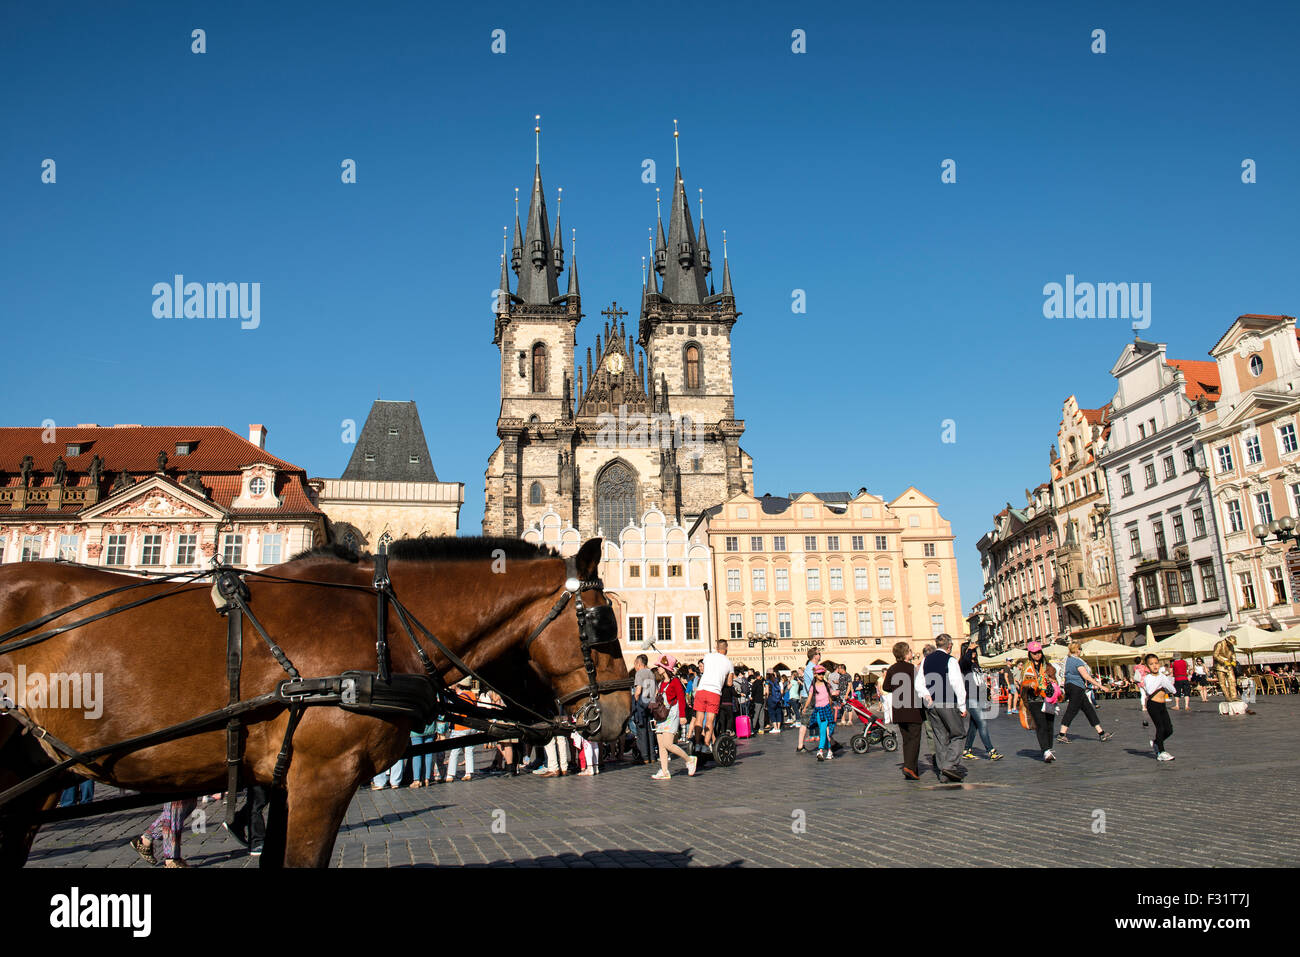 Prague, Czech Republic - June 4, 2015: The Church of Our Lady before Tyn is a dominant feature of the Old Town of Prague, Czech Stock Photo